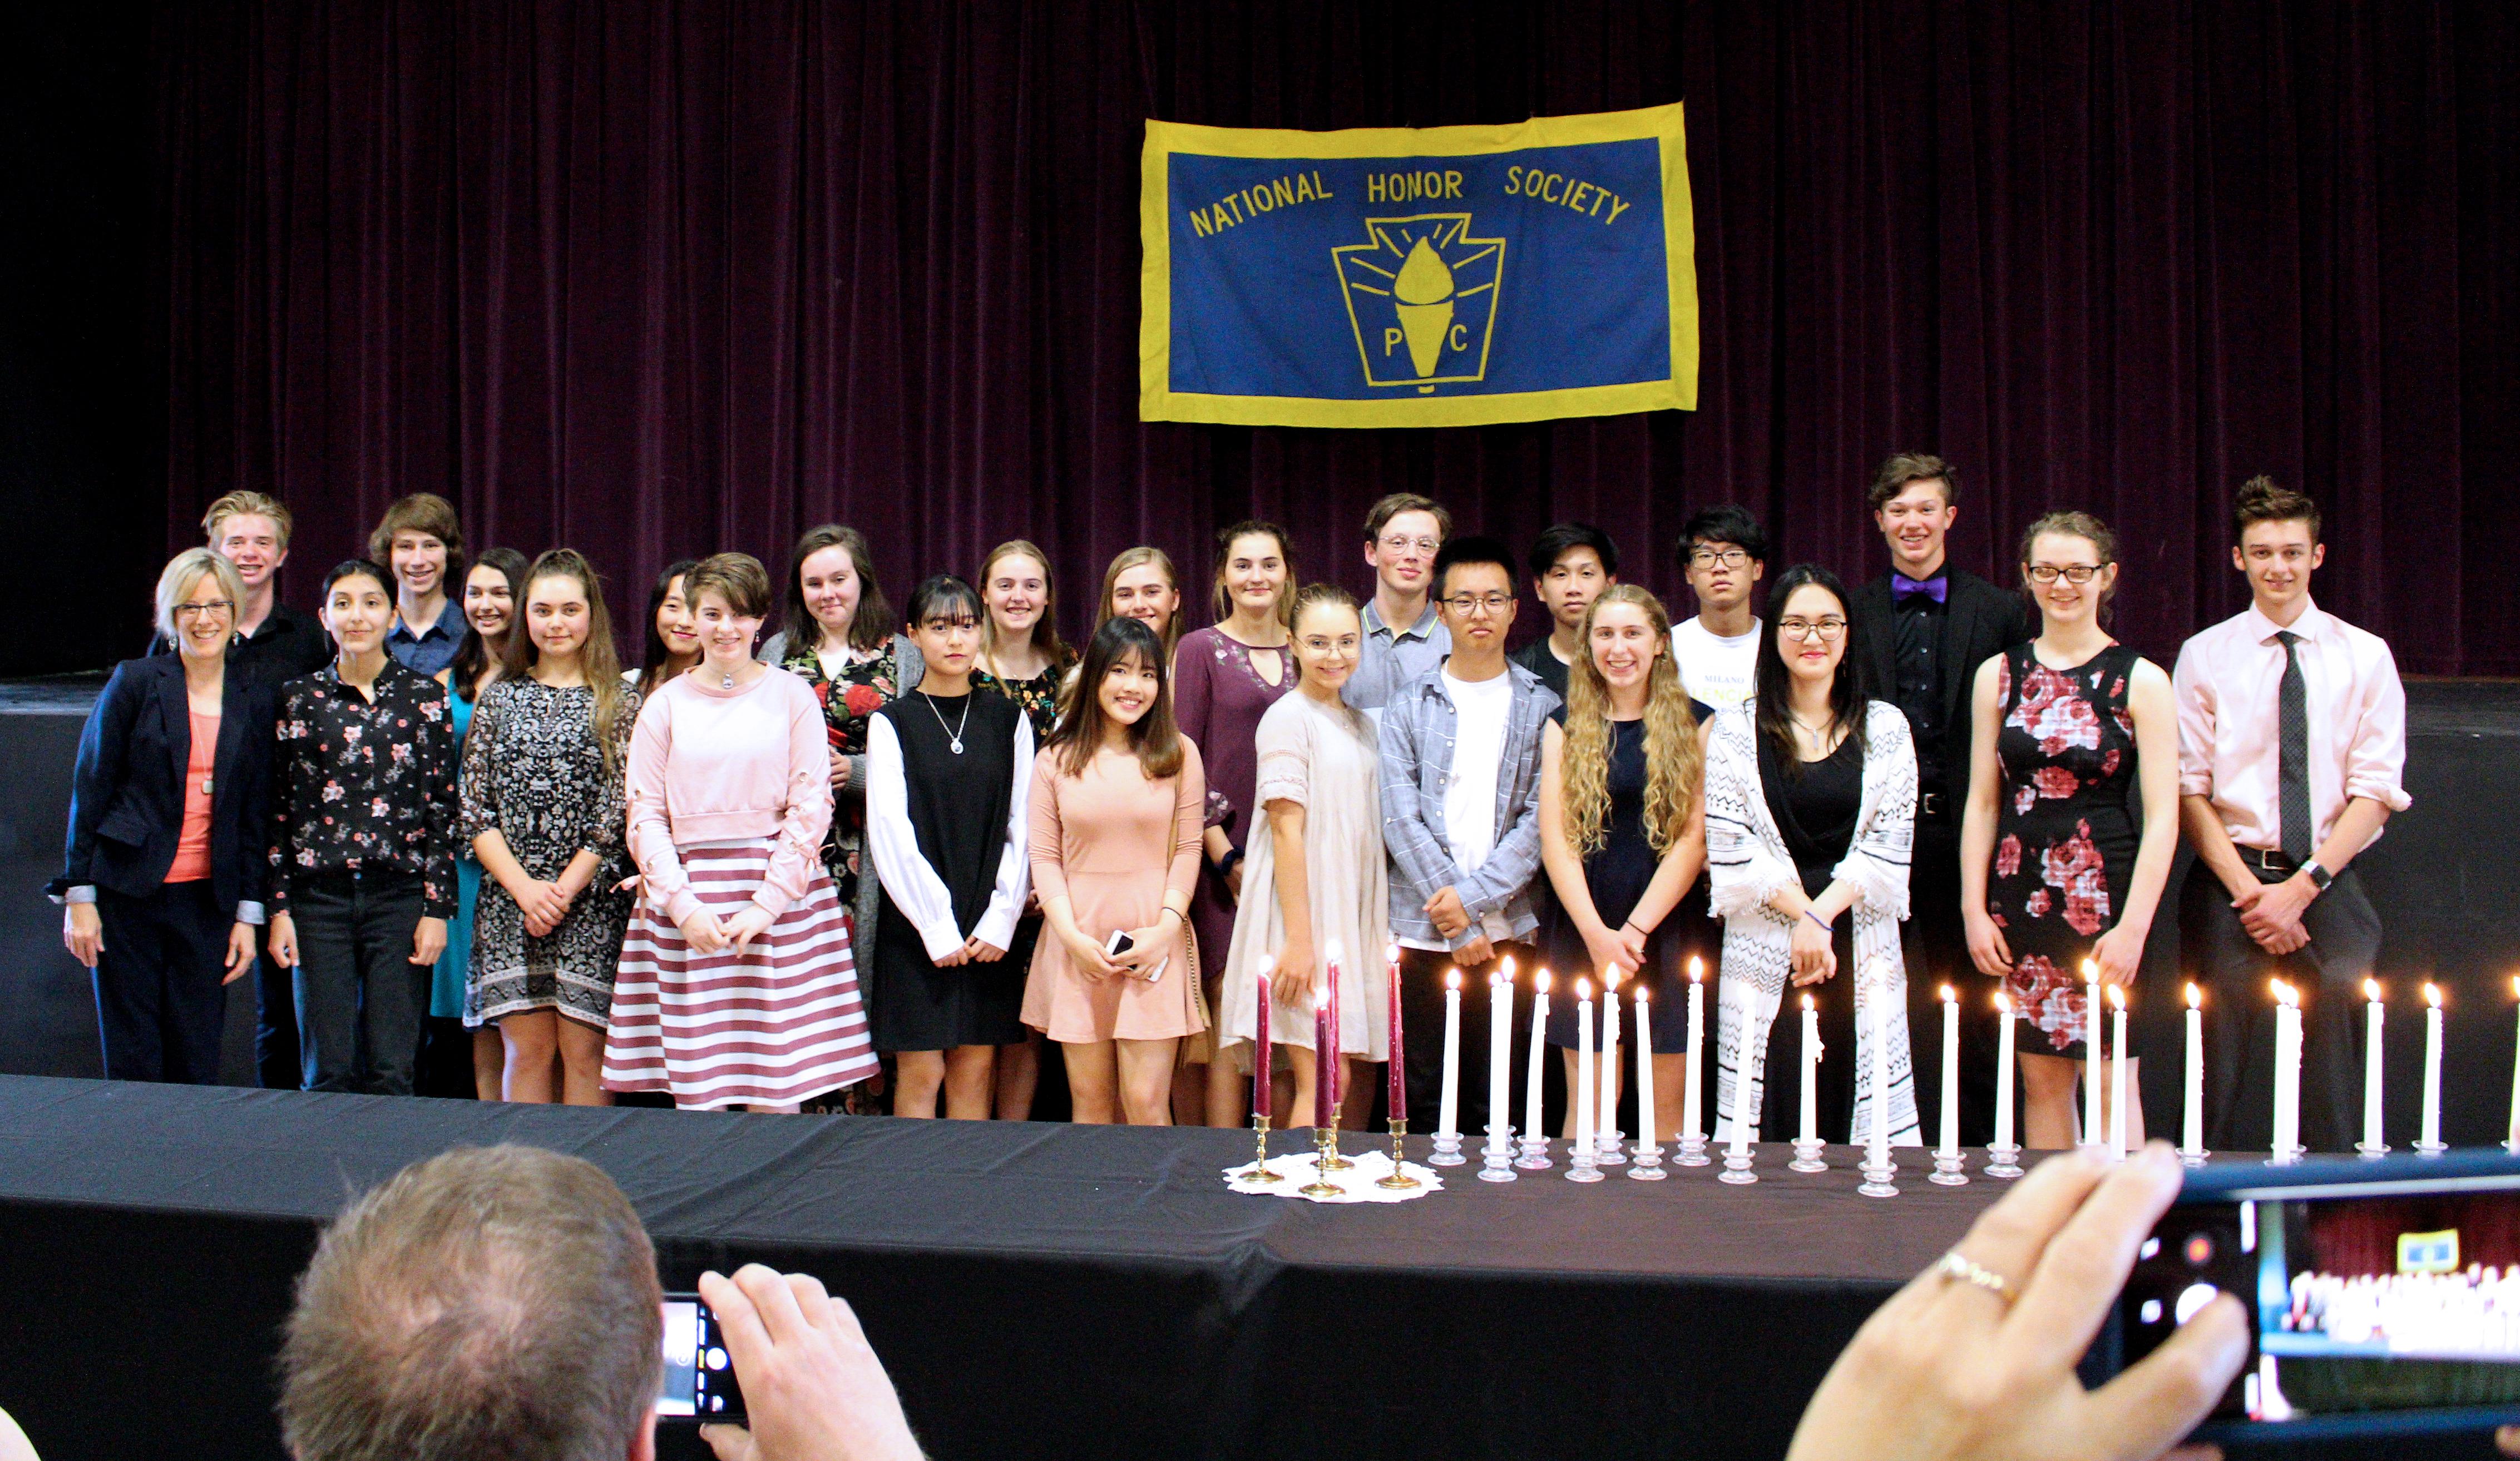 2018 inductees to the National Honor Society